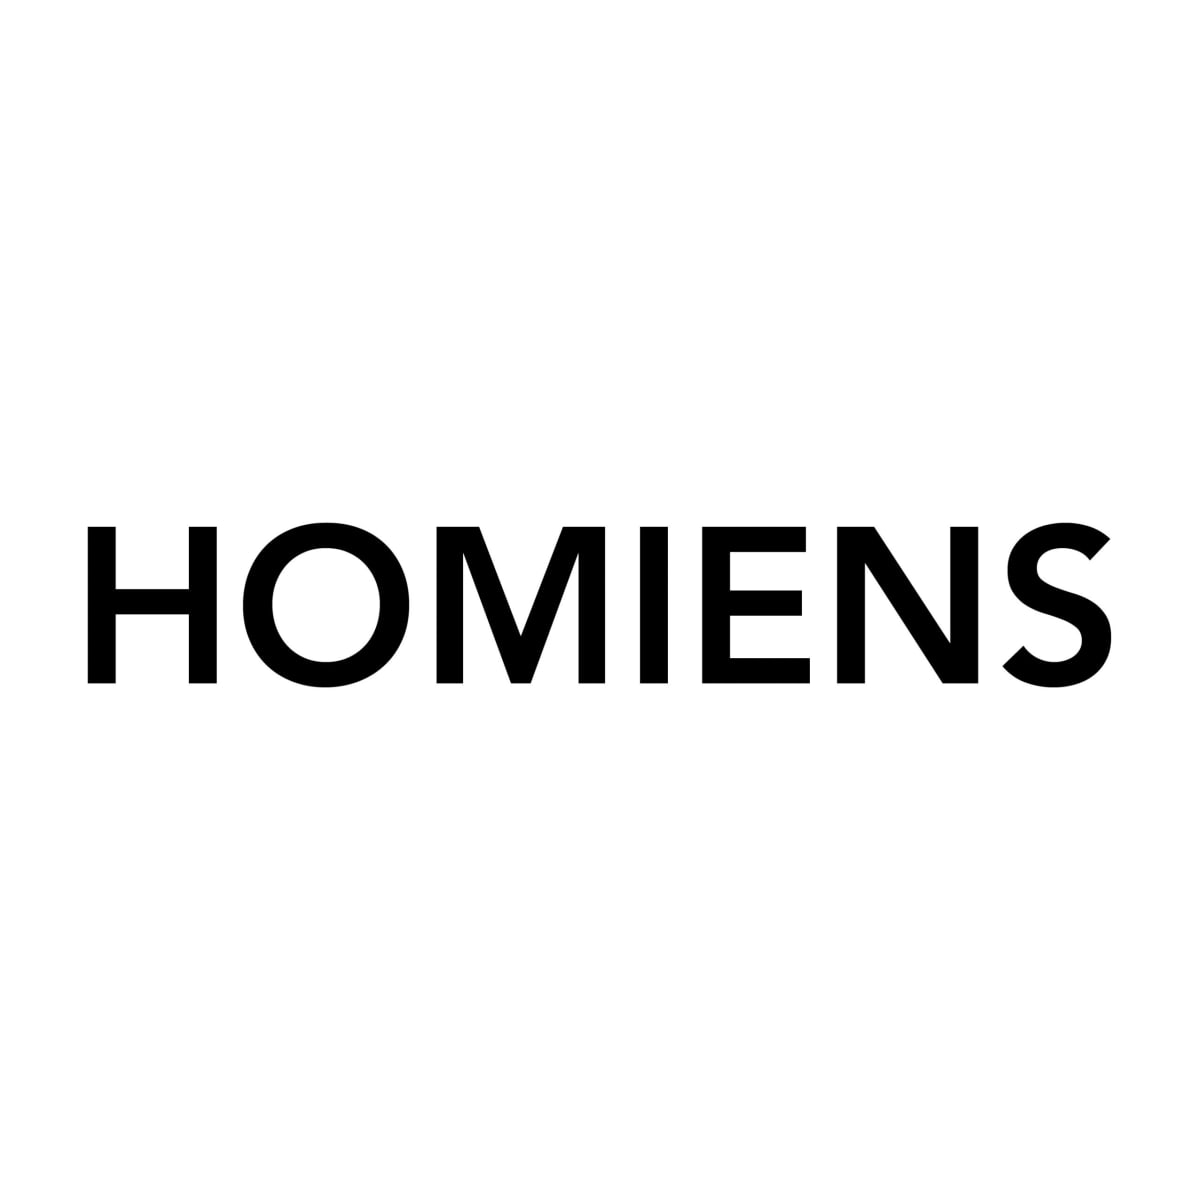 The Homiens Art Prize